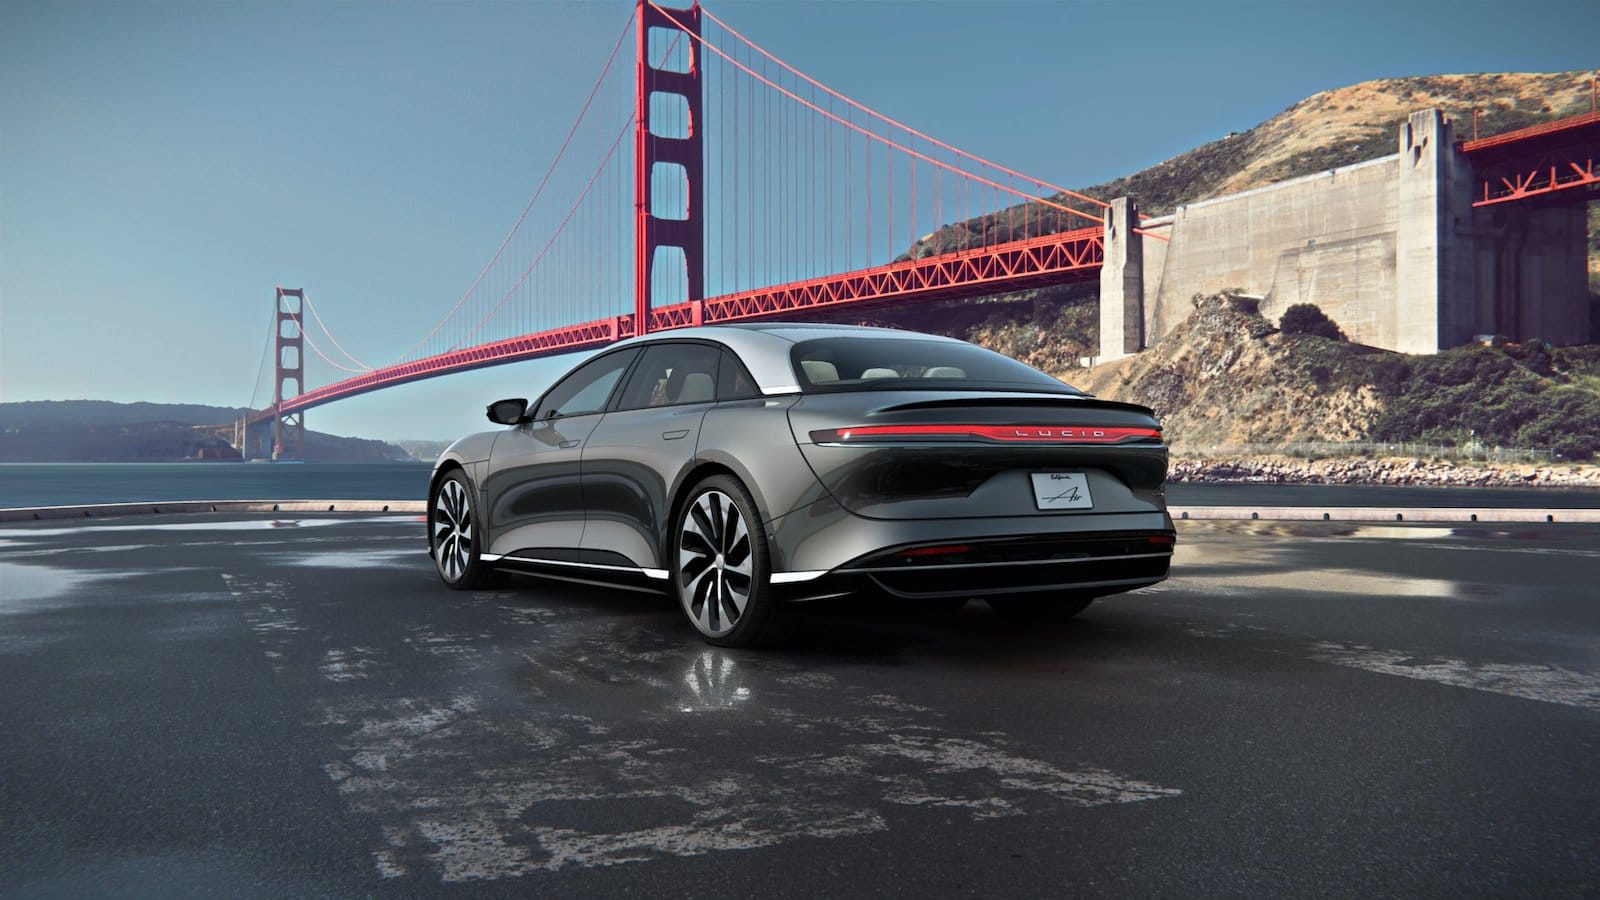 Lucid Expands Air Portfolio with Grand Touring Performance Model The